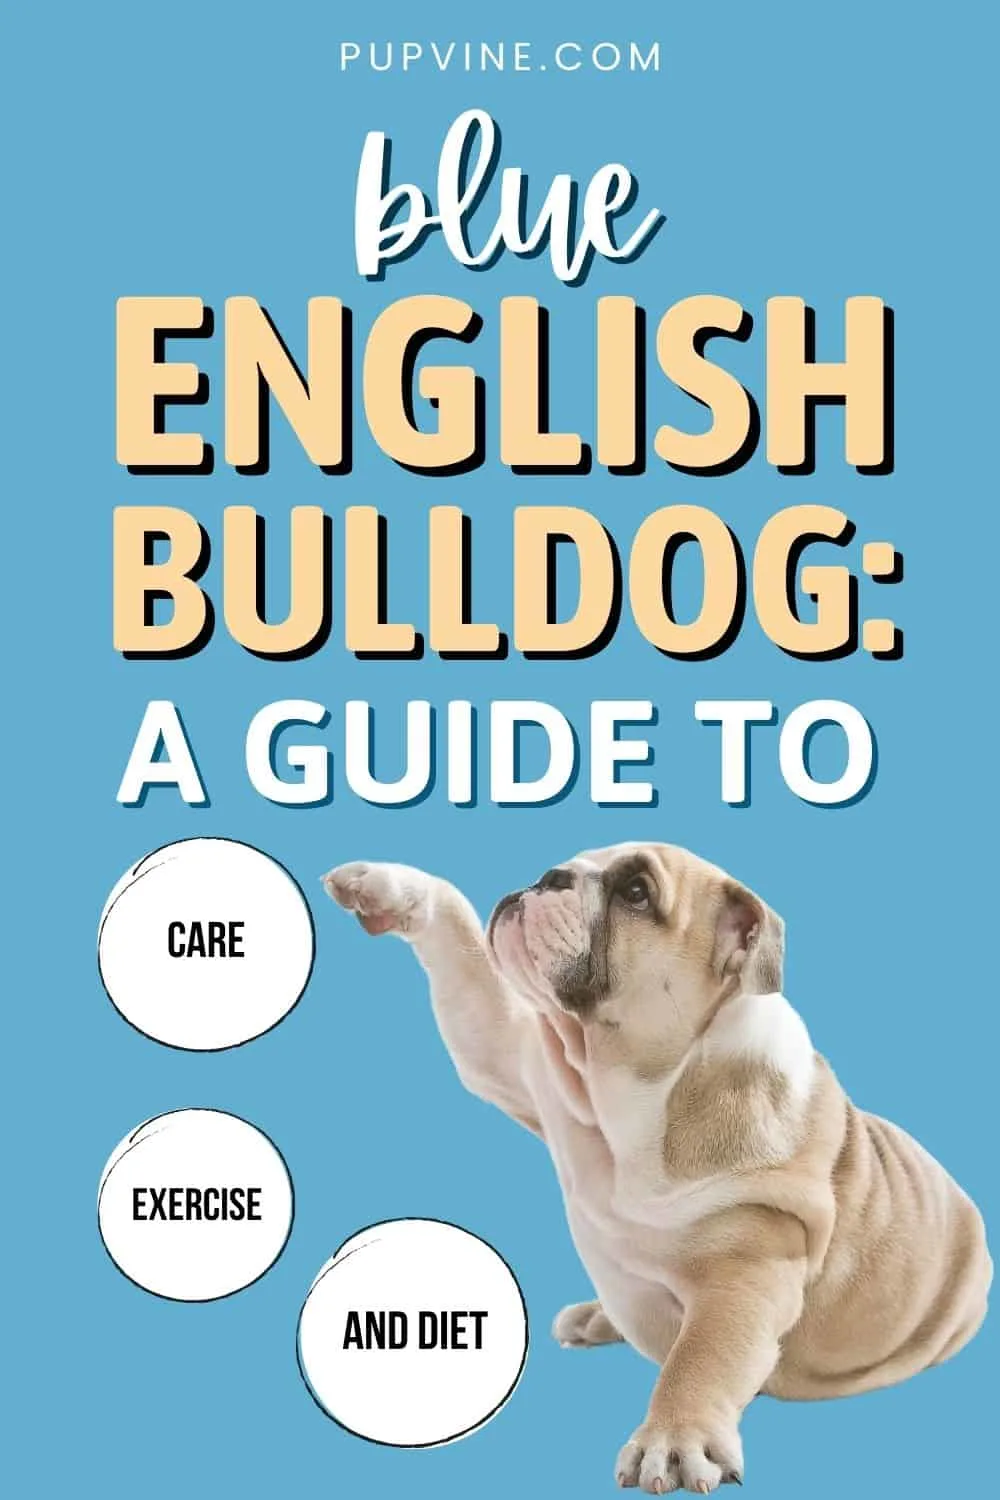 Blue English Bulldog: A Guide To Care, Exercise, And Diet